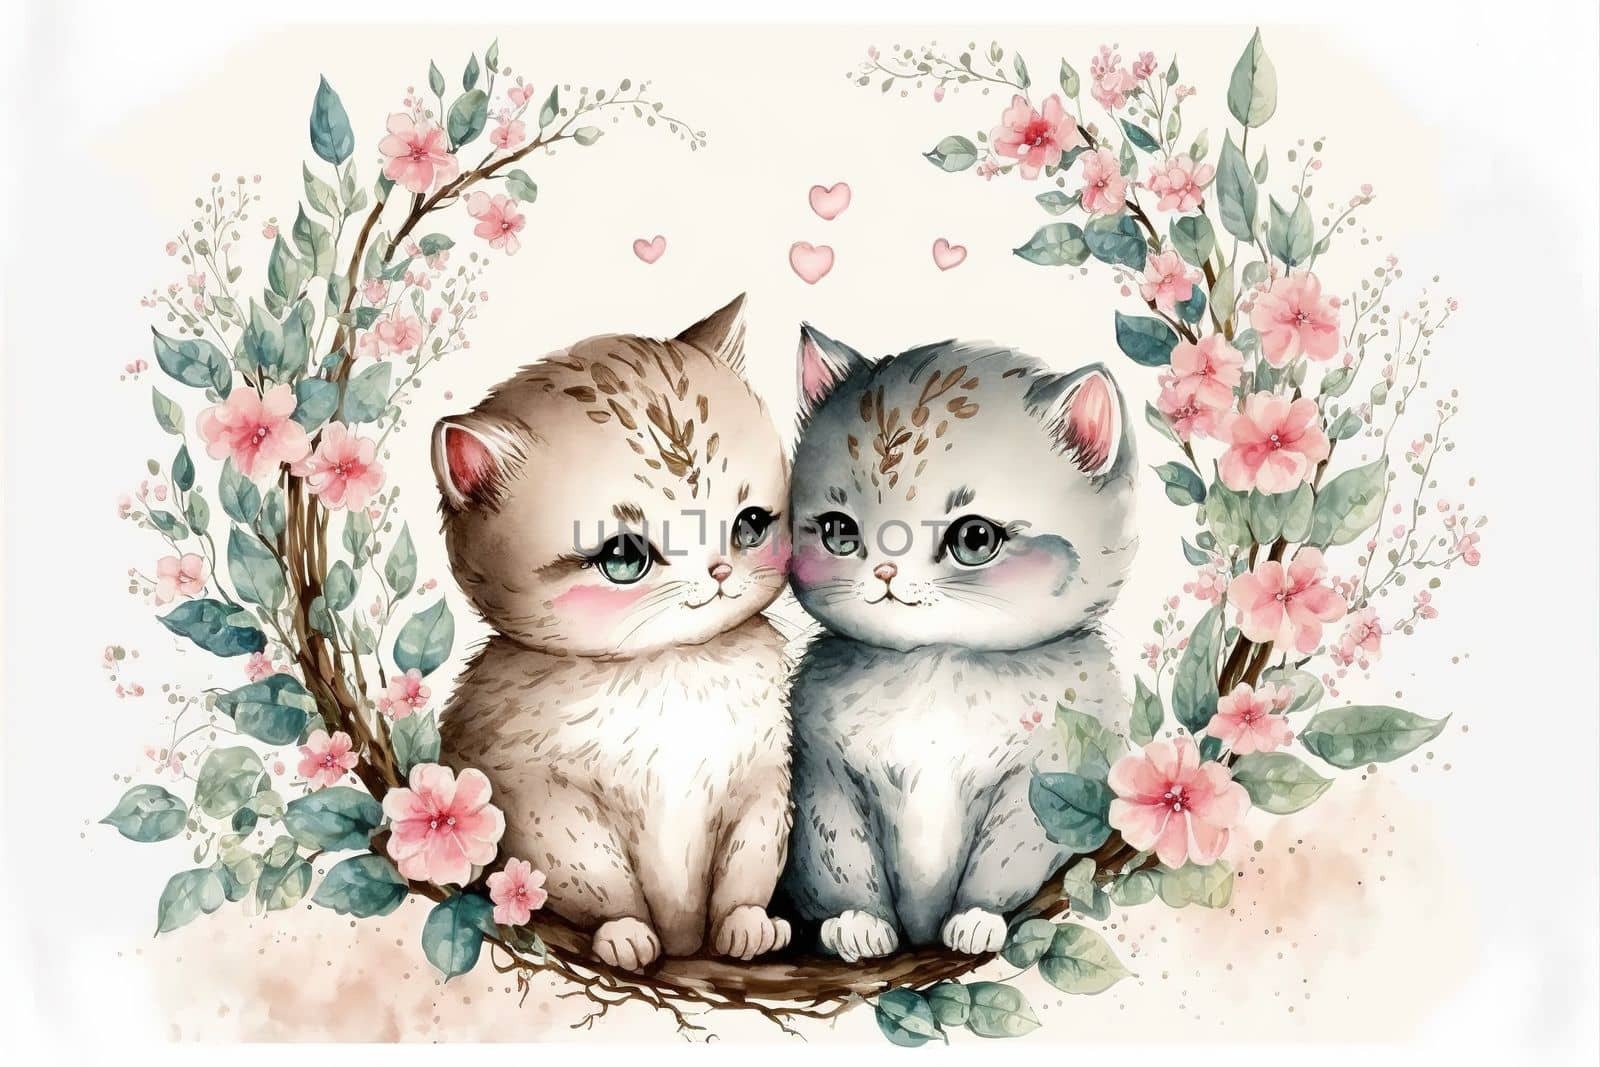 Cute little kitten in love on romantic Valentine's day hand drawn cartoon style by biancoblue